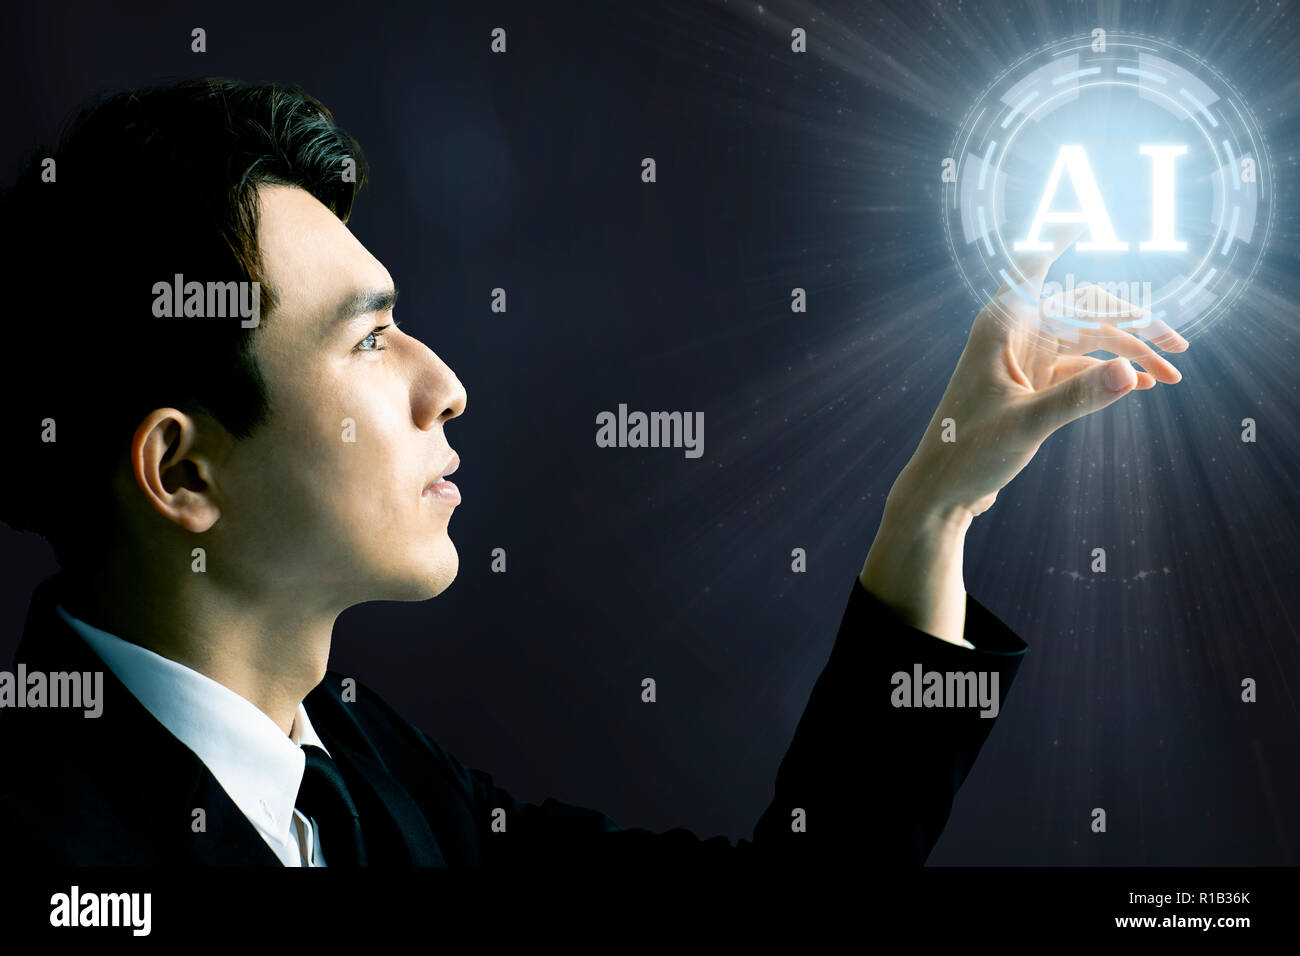 businessman and AI (Artificial Intelligence) concept Stock Photo